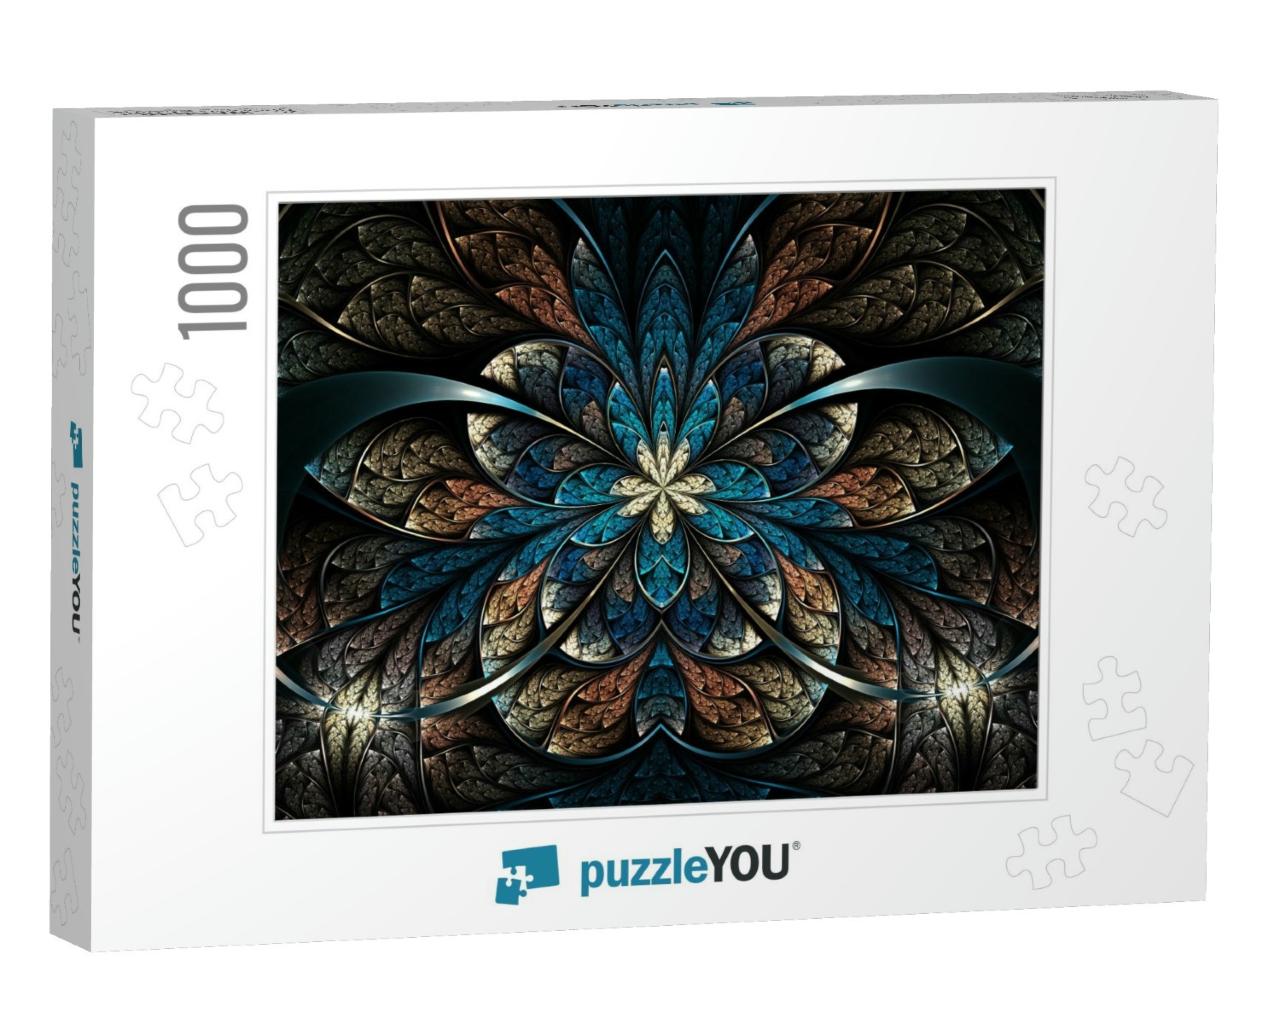 Dark & Colorful Fractal Flower or Butterfly, Digital Artw... Jigsaw Puzzle with 1000 pieces